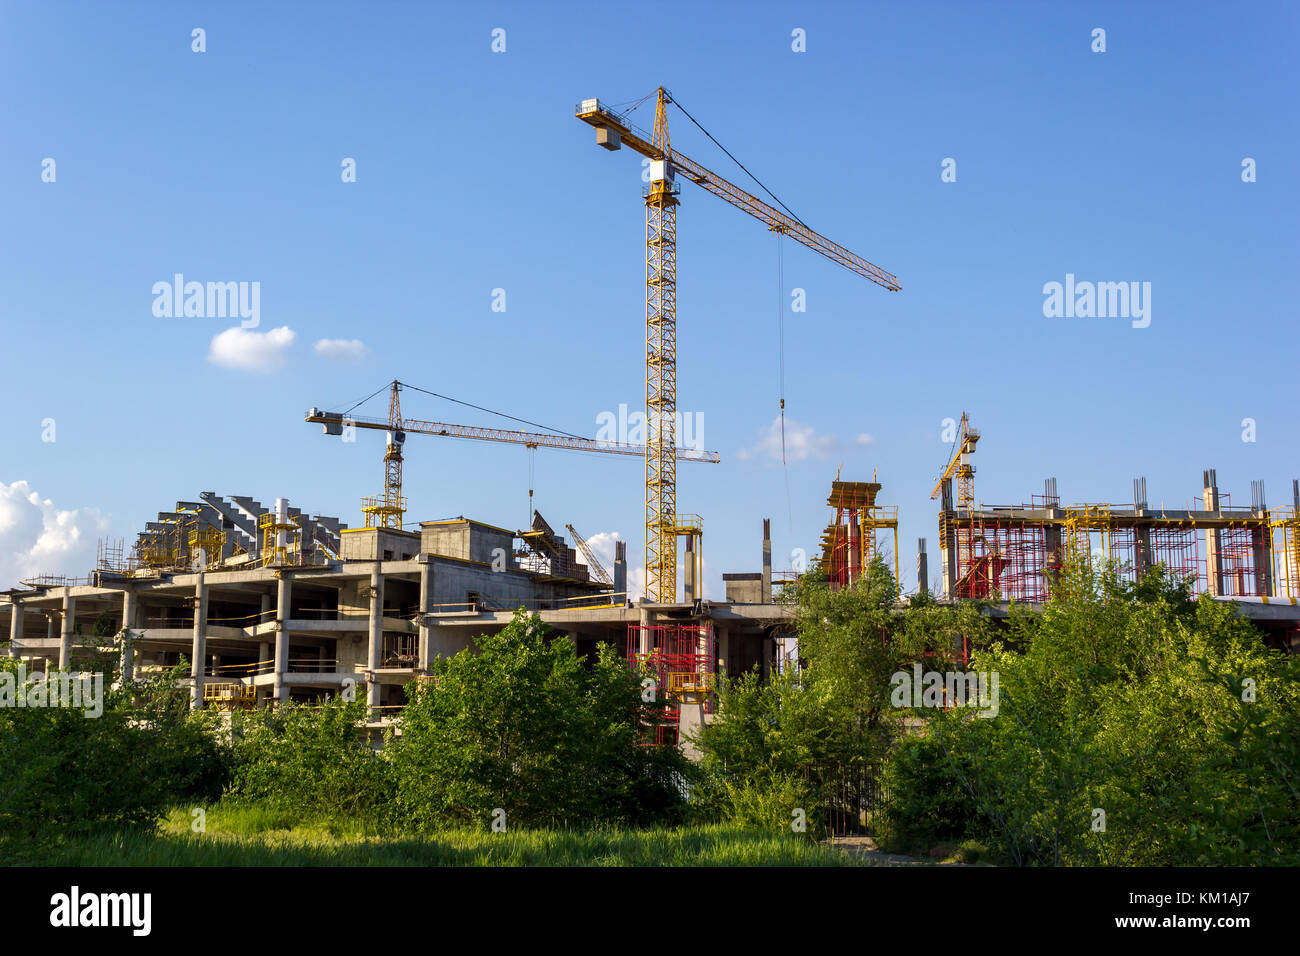 Construction site with crane and building Stock Photo